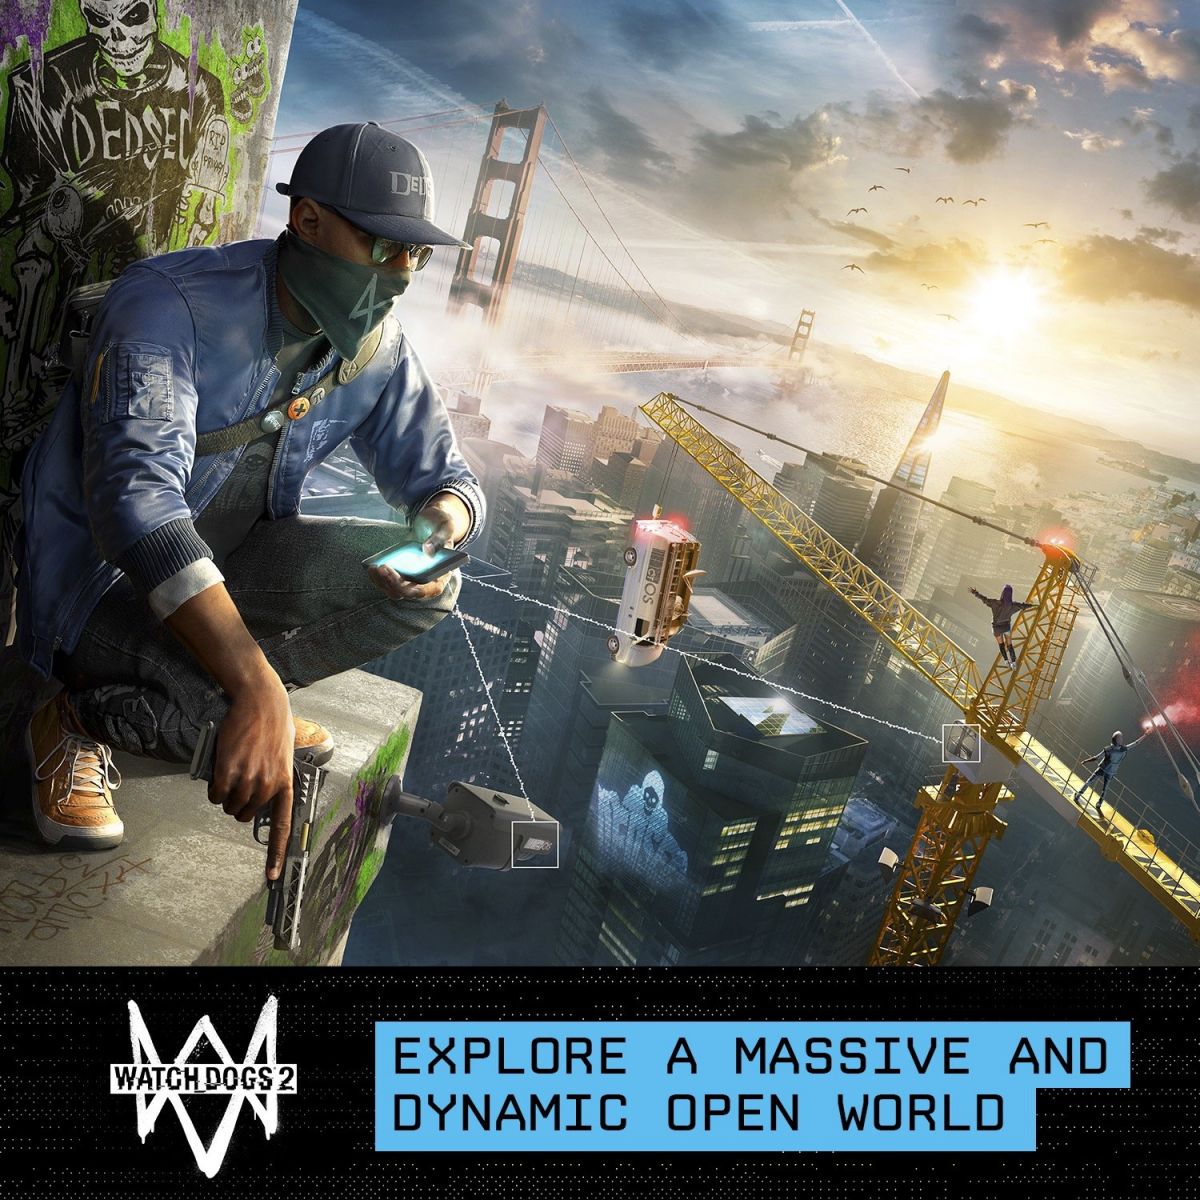 how to download watch dogs for free